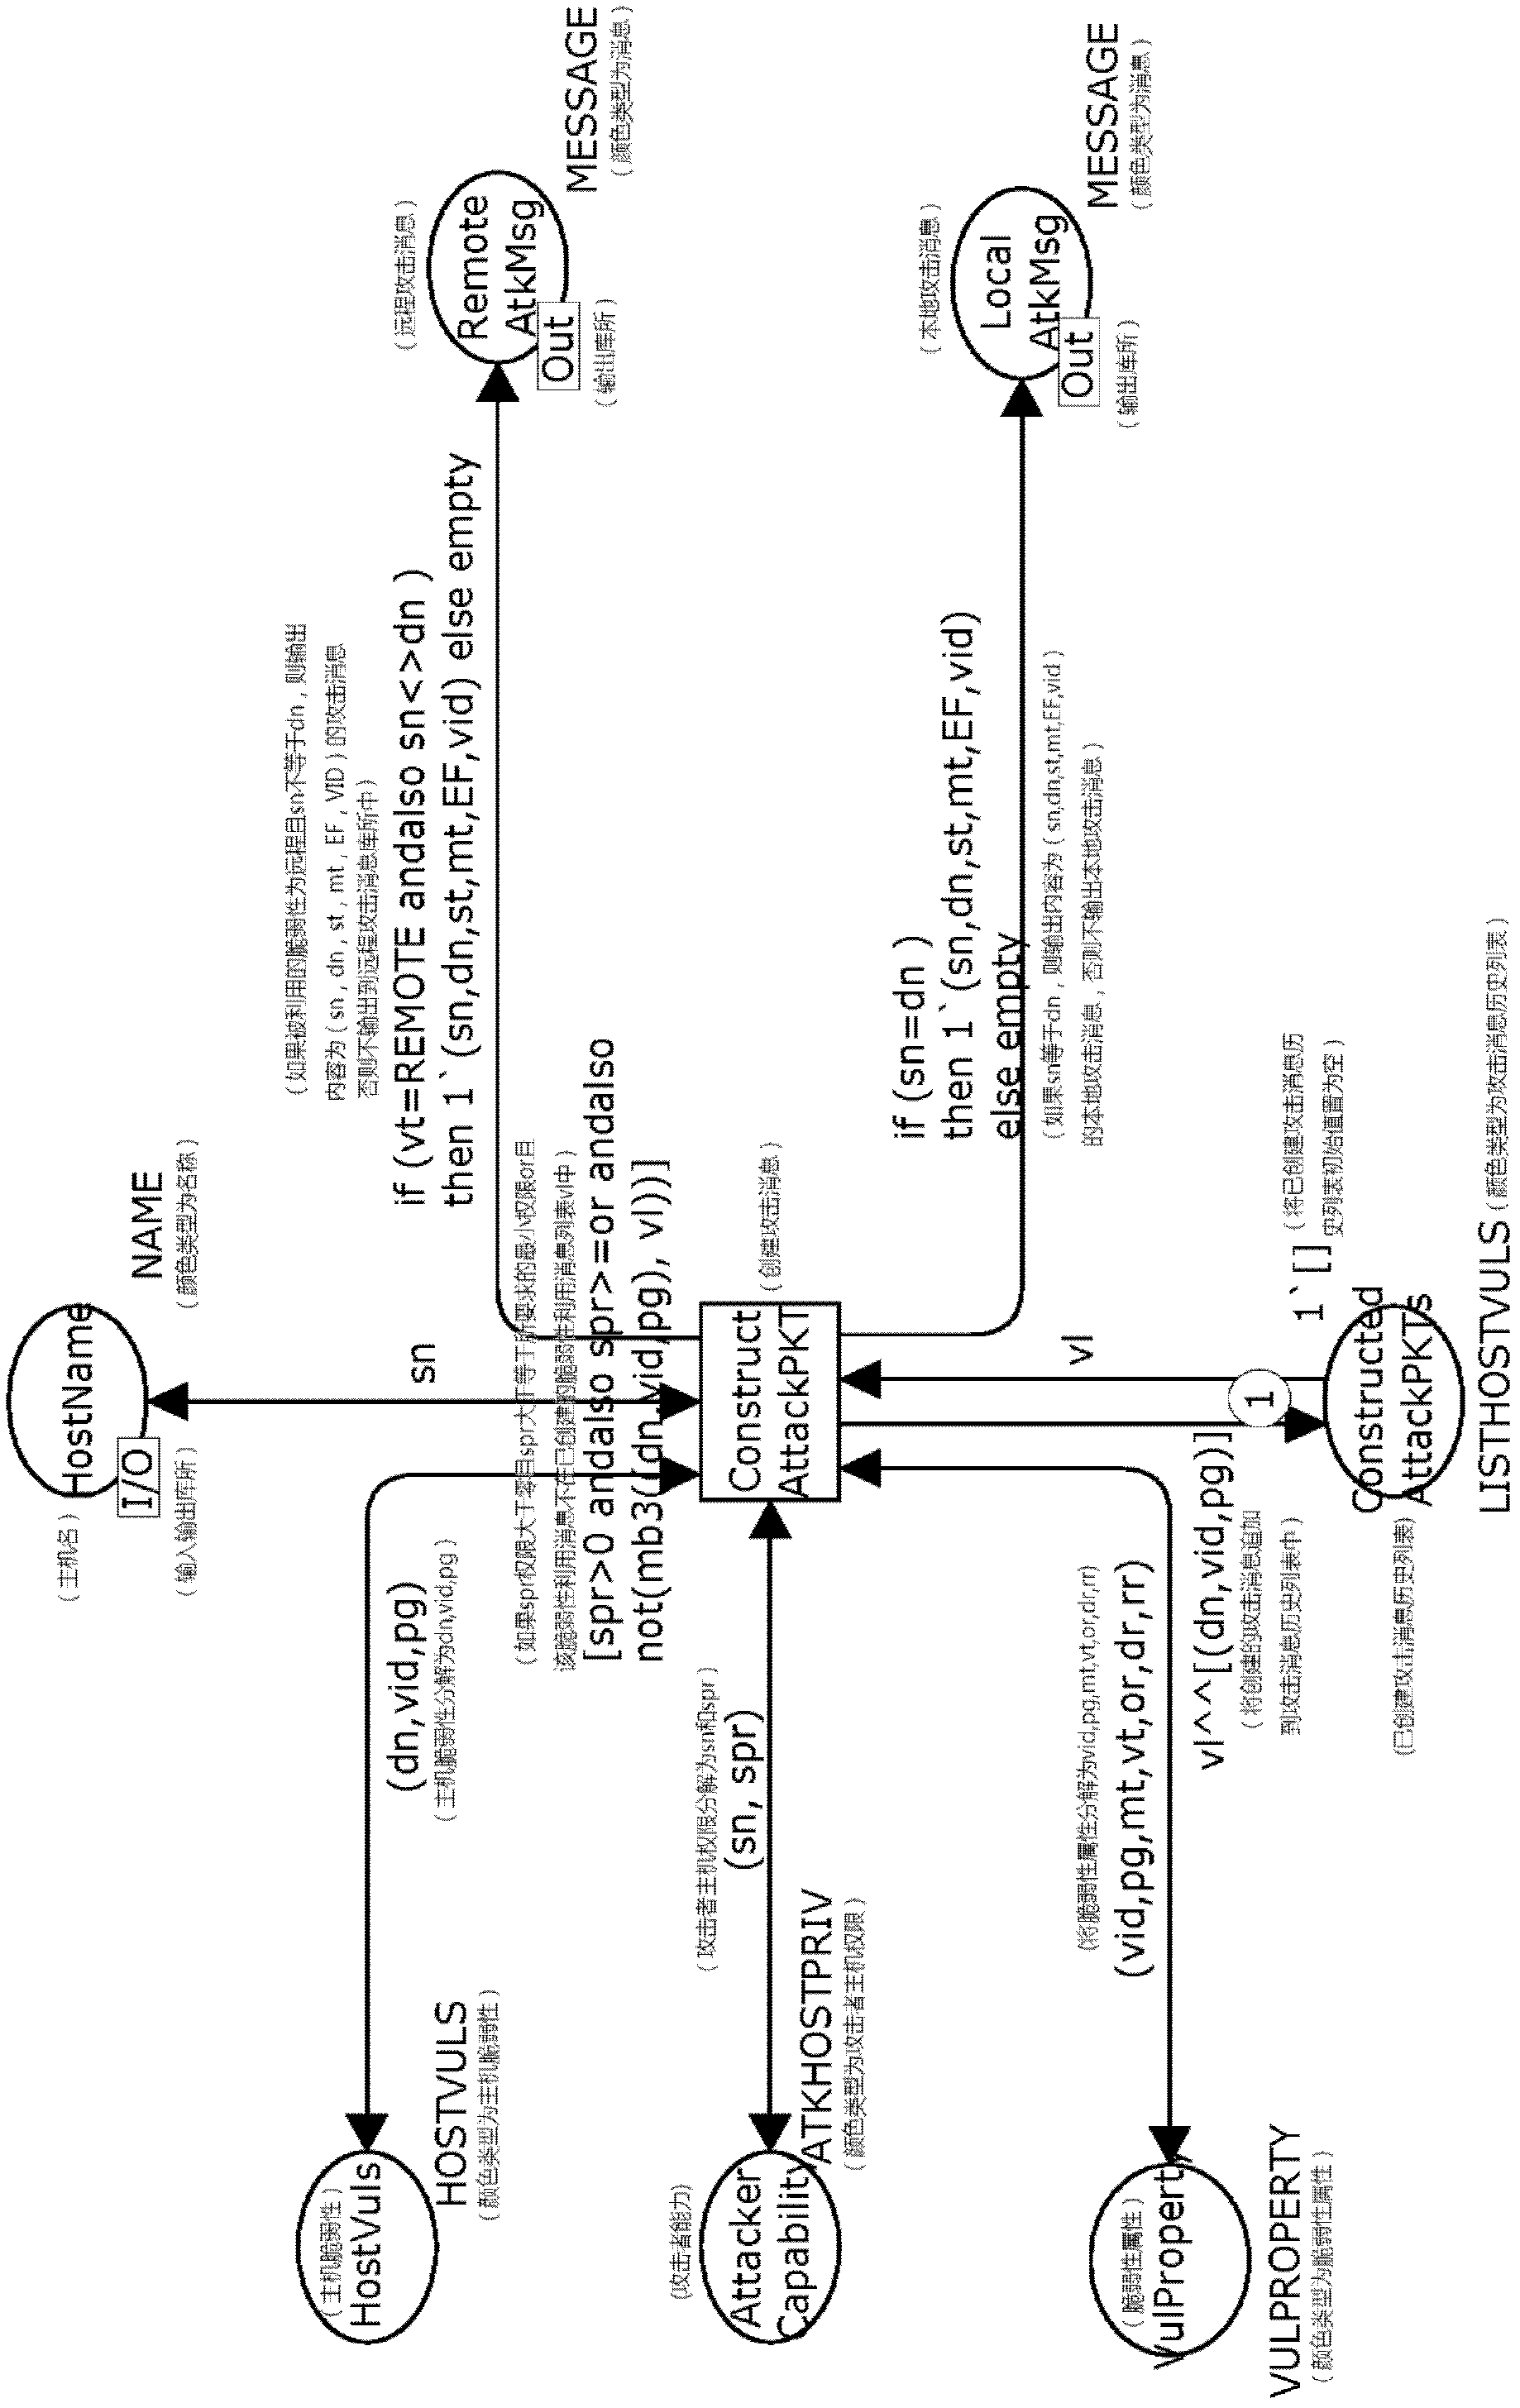 Method for identifying key attack path in service system